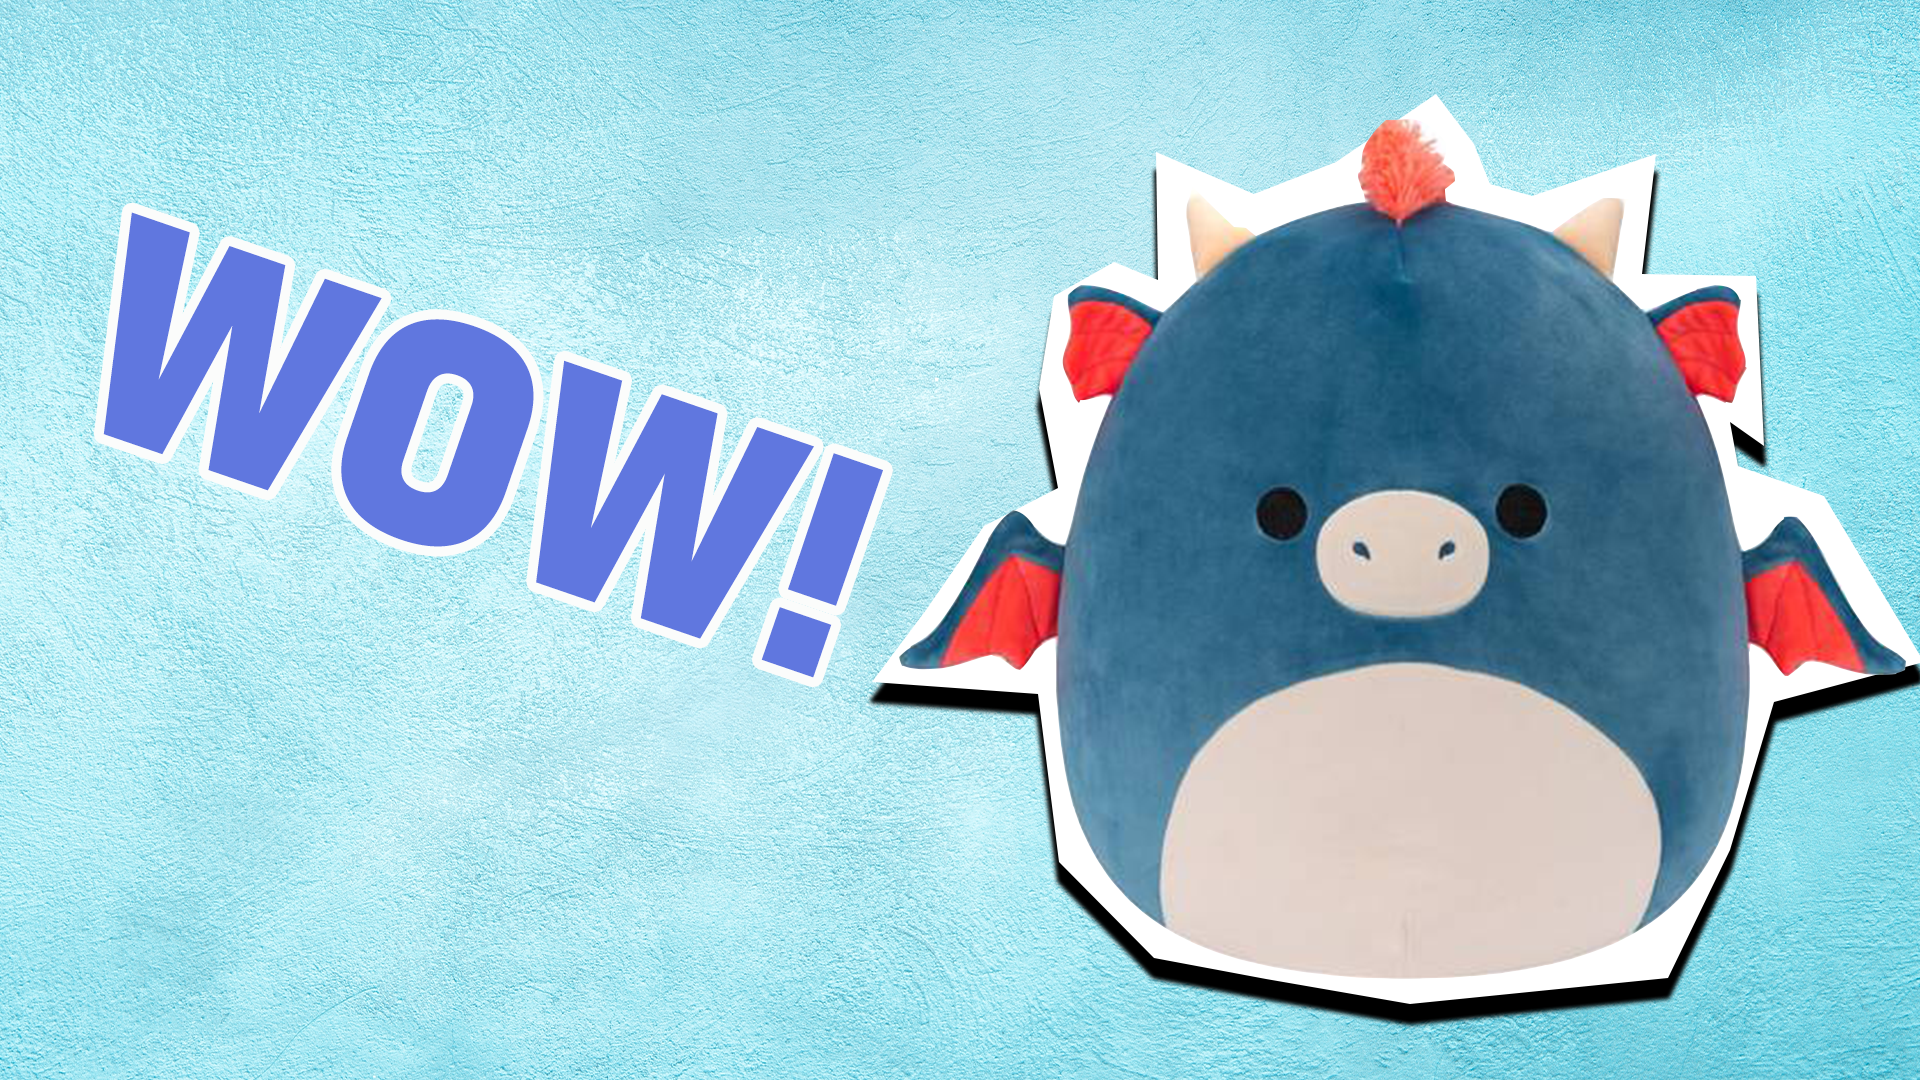 Incredible! Either you're Squishmallows biggest fan, or you are one, cos you got 100% correct answers! Congrats!